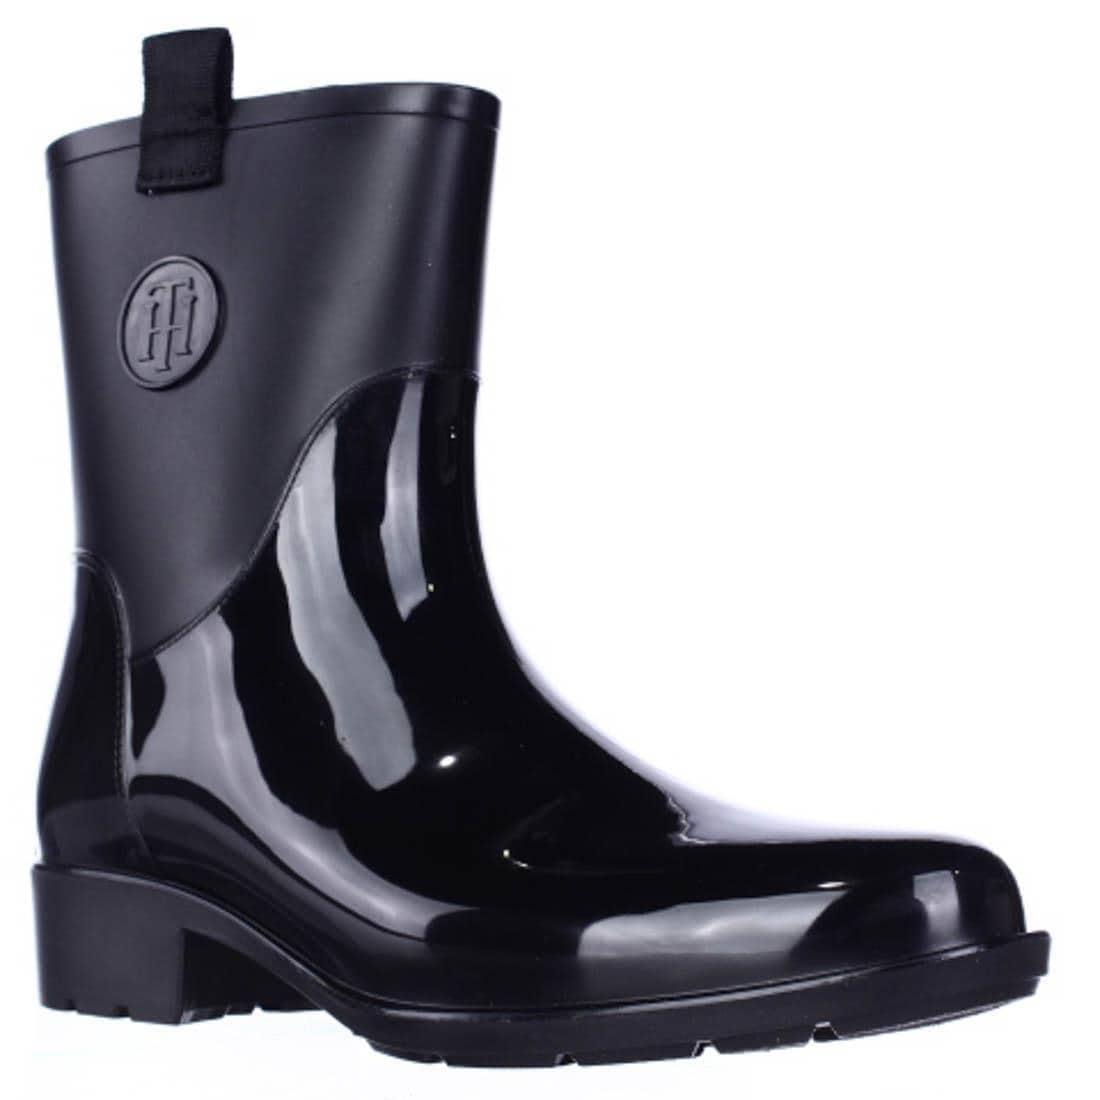 tommy hilfiger ankle rain boots